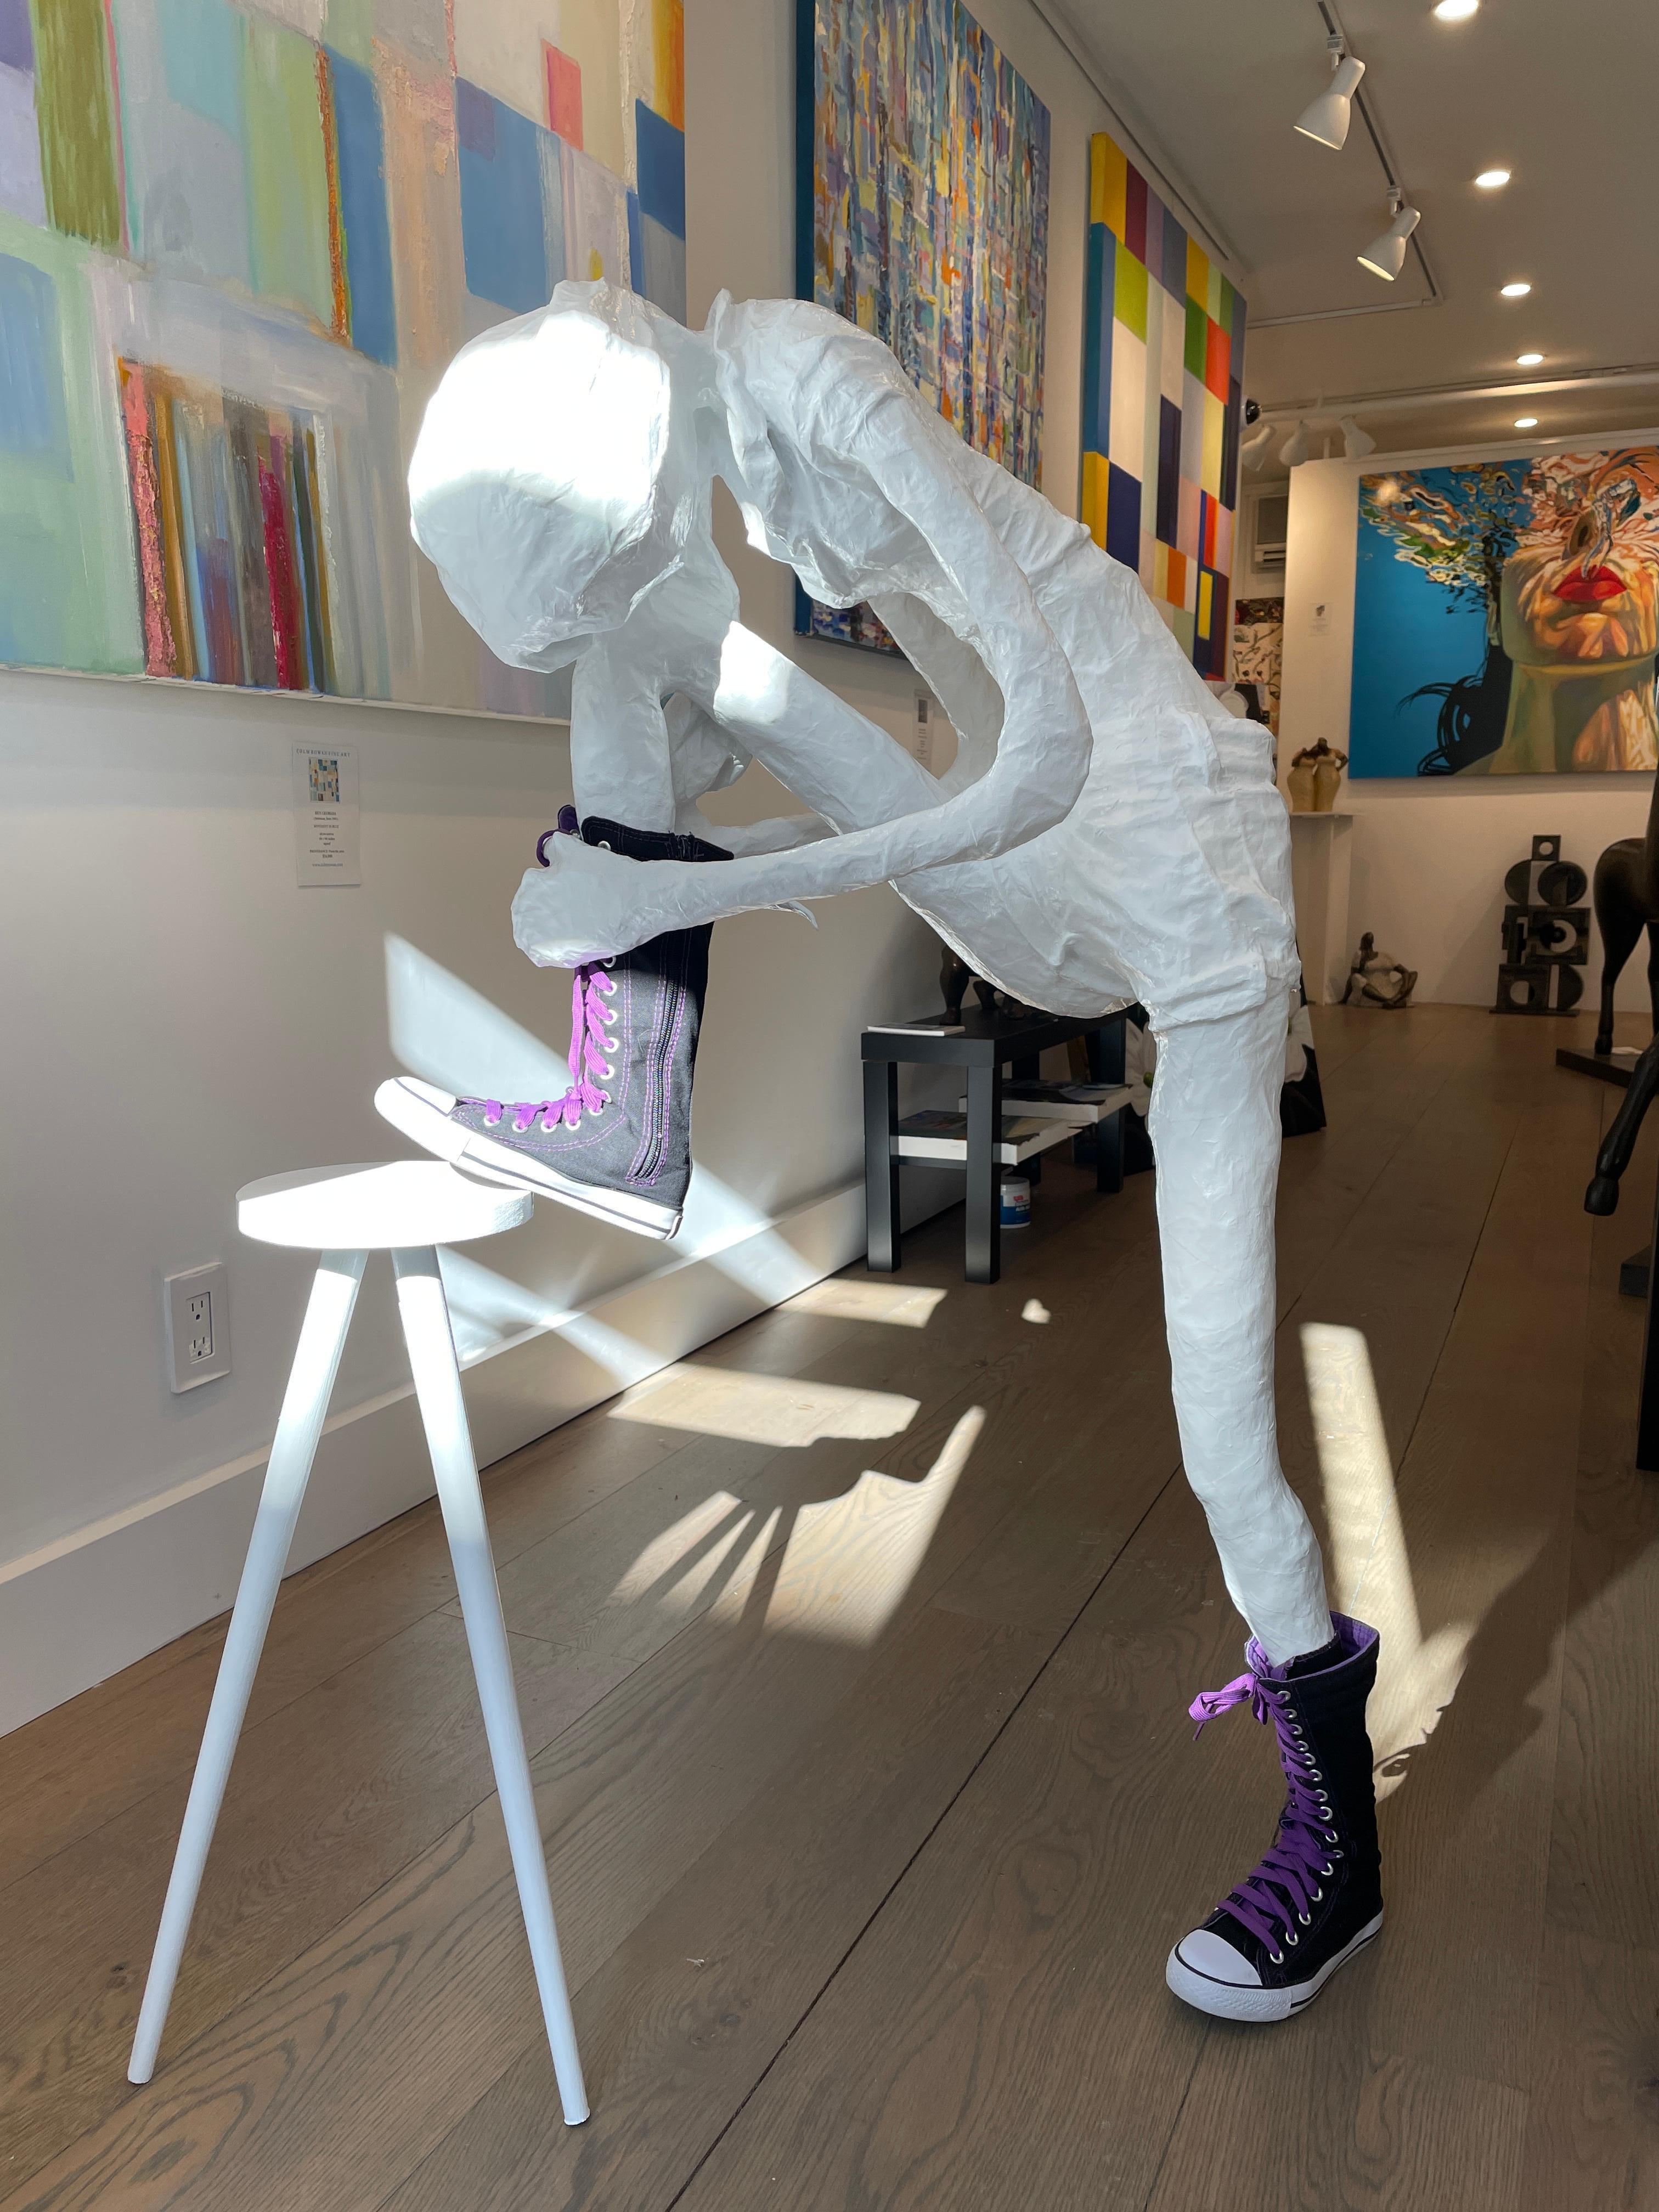 Bret Reilly Figurative Sculpture - Floor Sculpture of a Girl Tying Her Shoe on a Stool. Title - Girl Tying Her Shoe